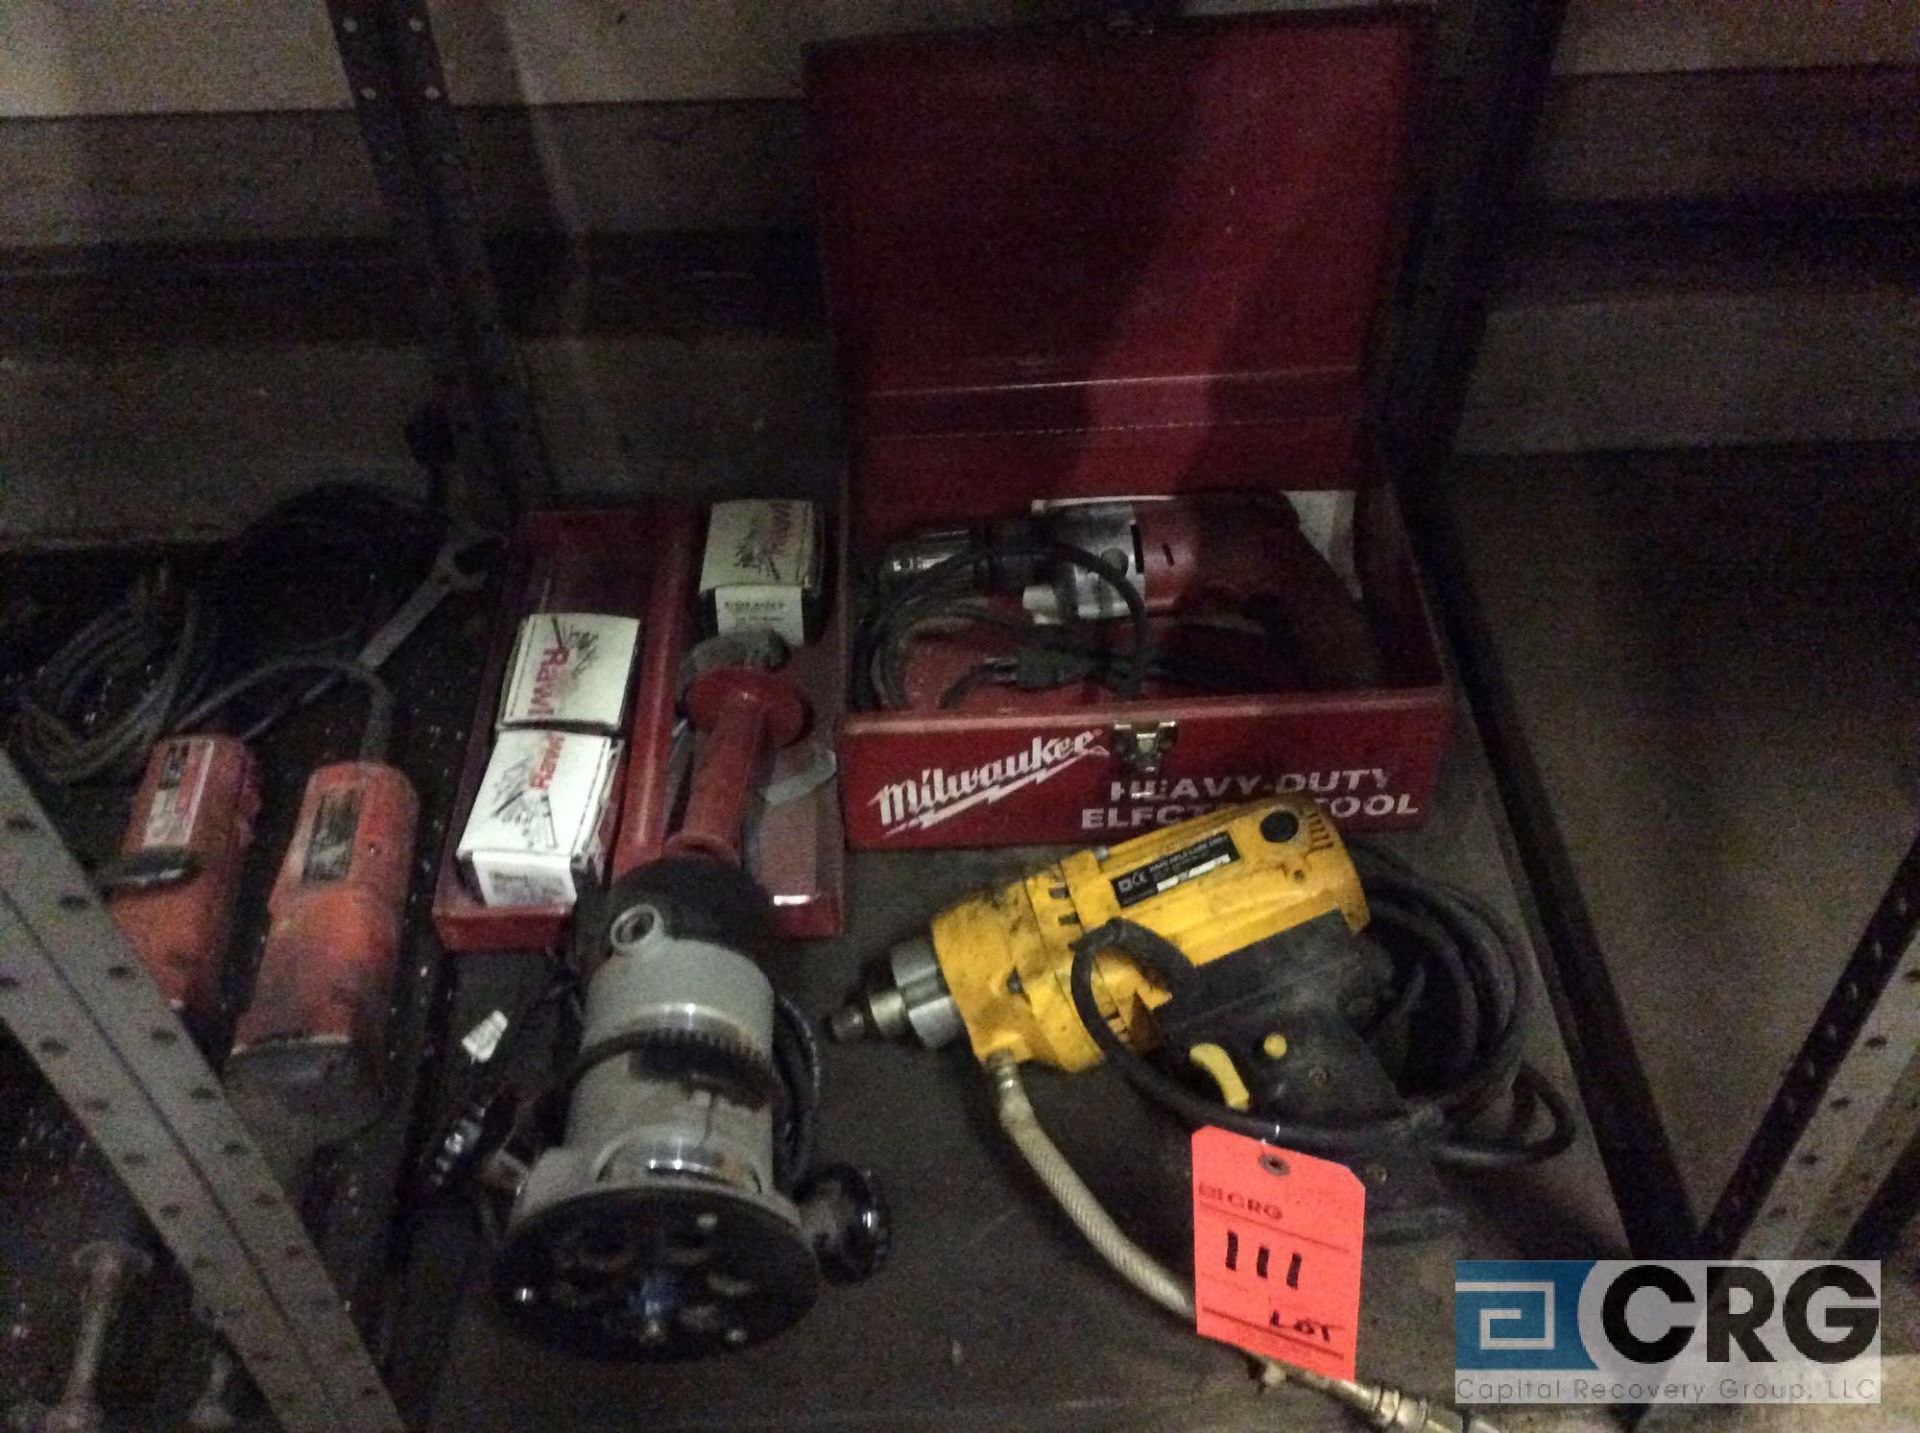 Lot of asst electric hand tools including drills, router, die grinders and impact gun - Image 3 of 3